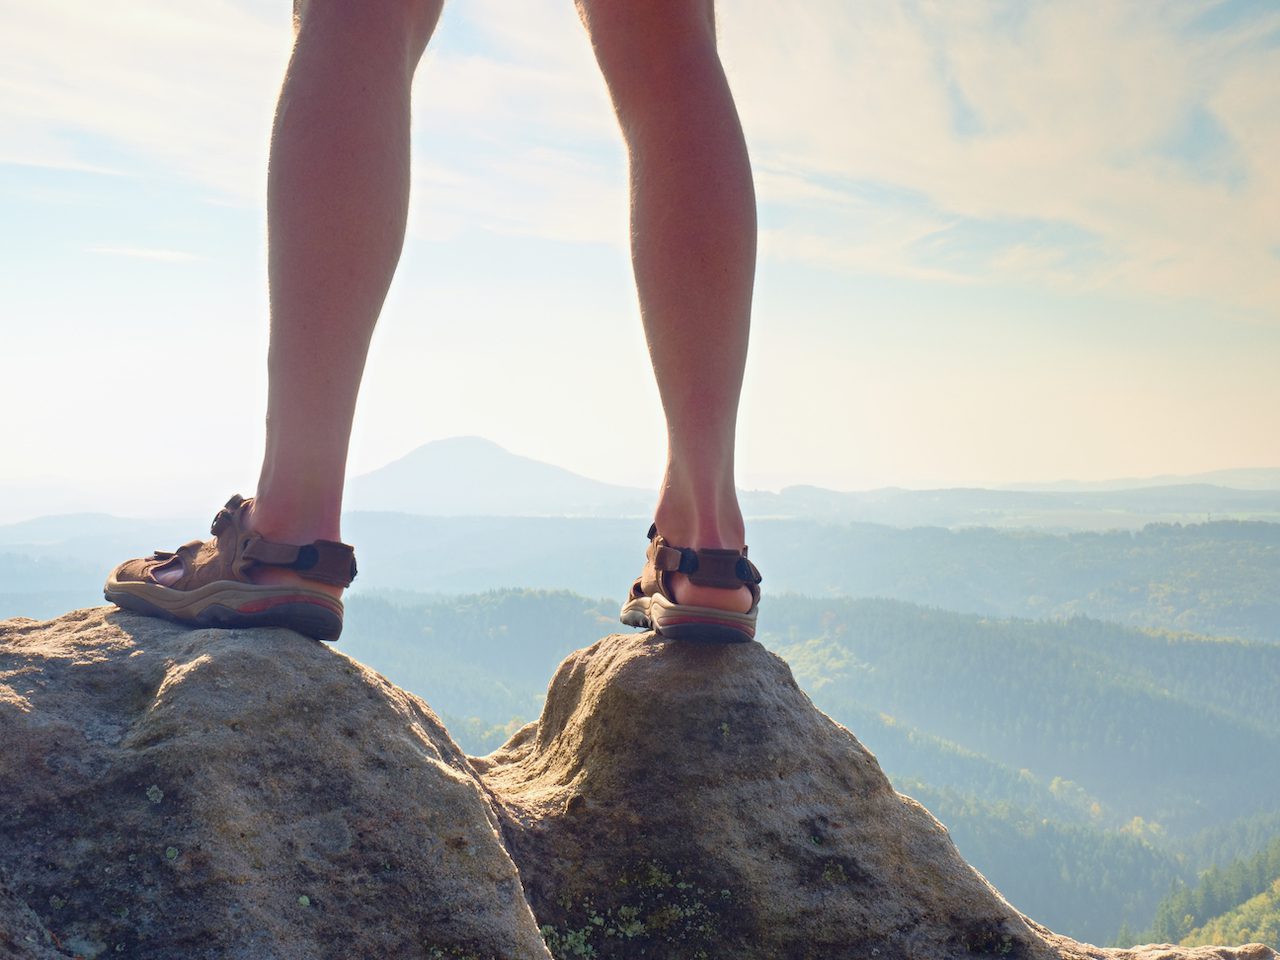 hiking sandals as an alternative for running shoes